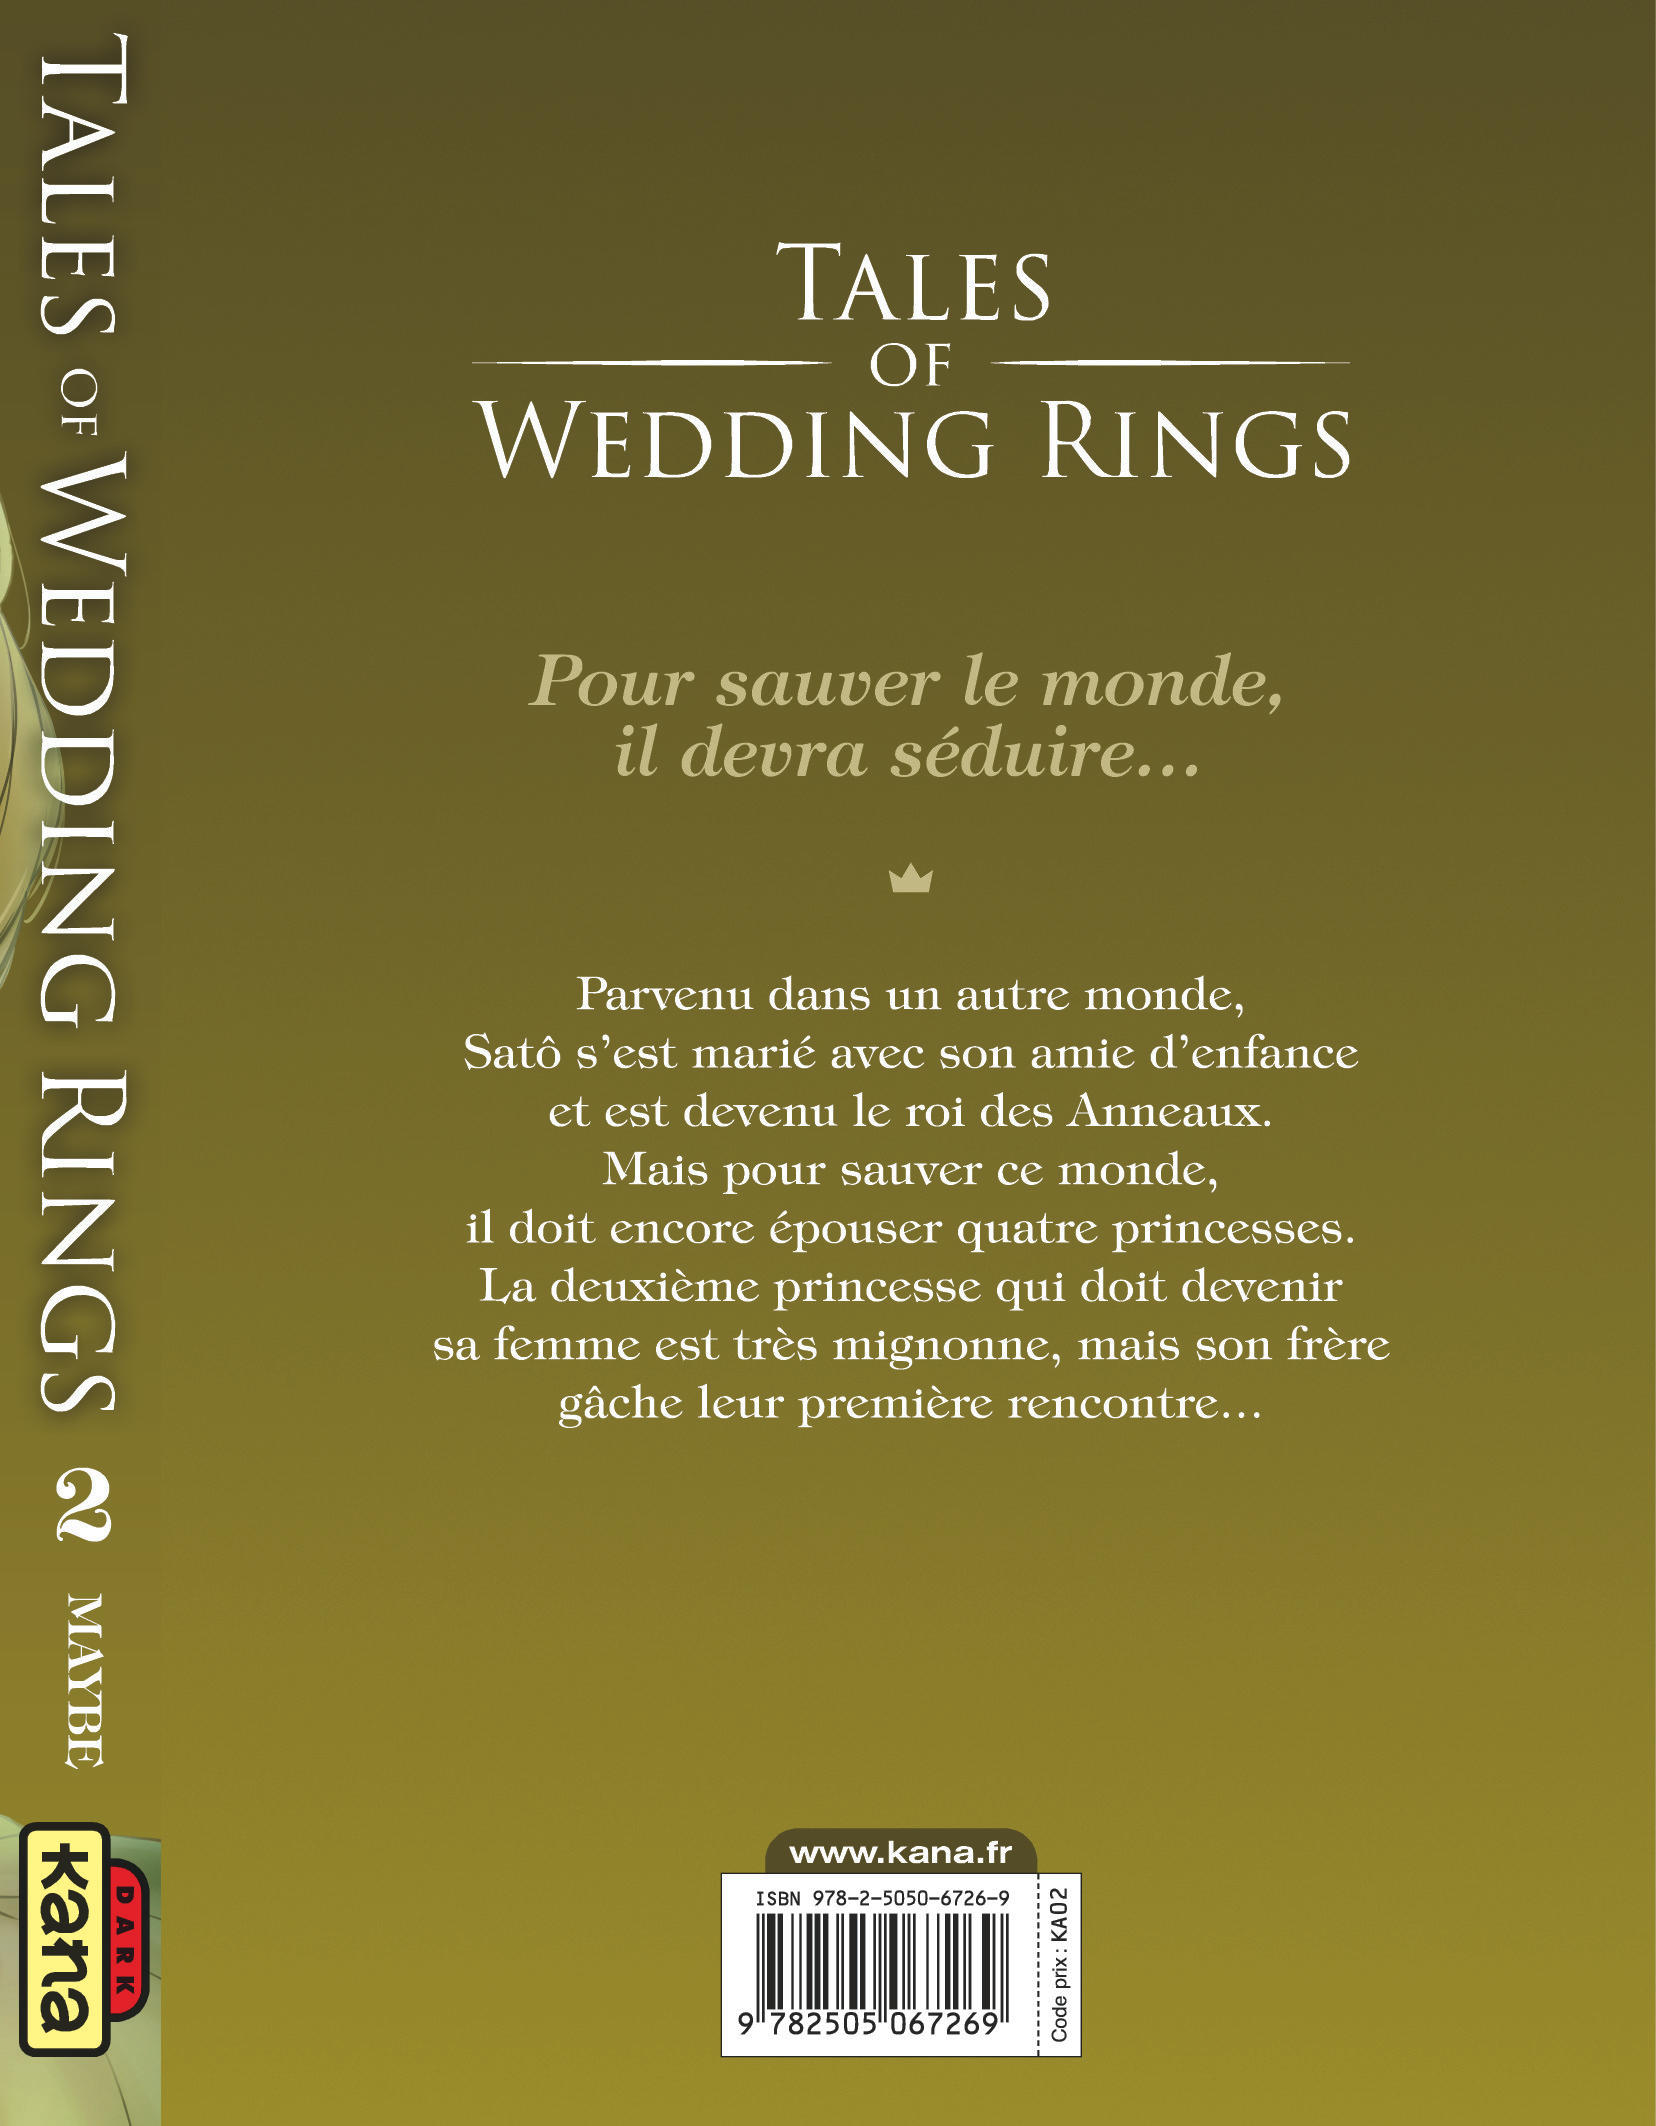 Tales of wedding rings – Tome 2 - 4eme